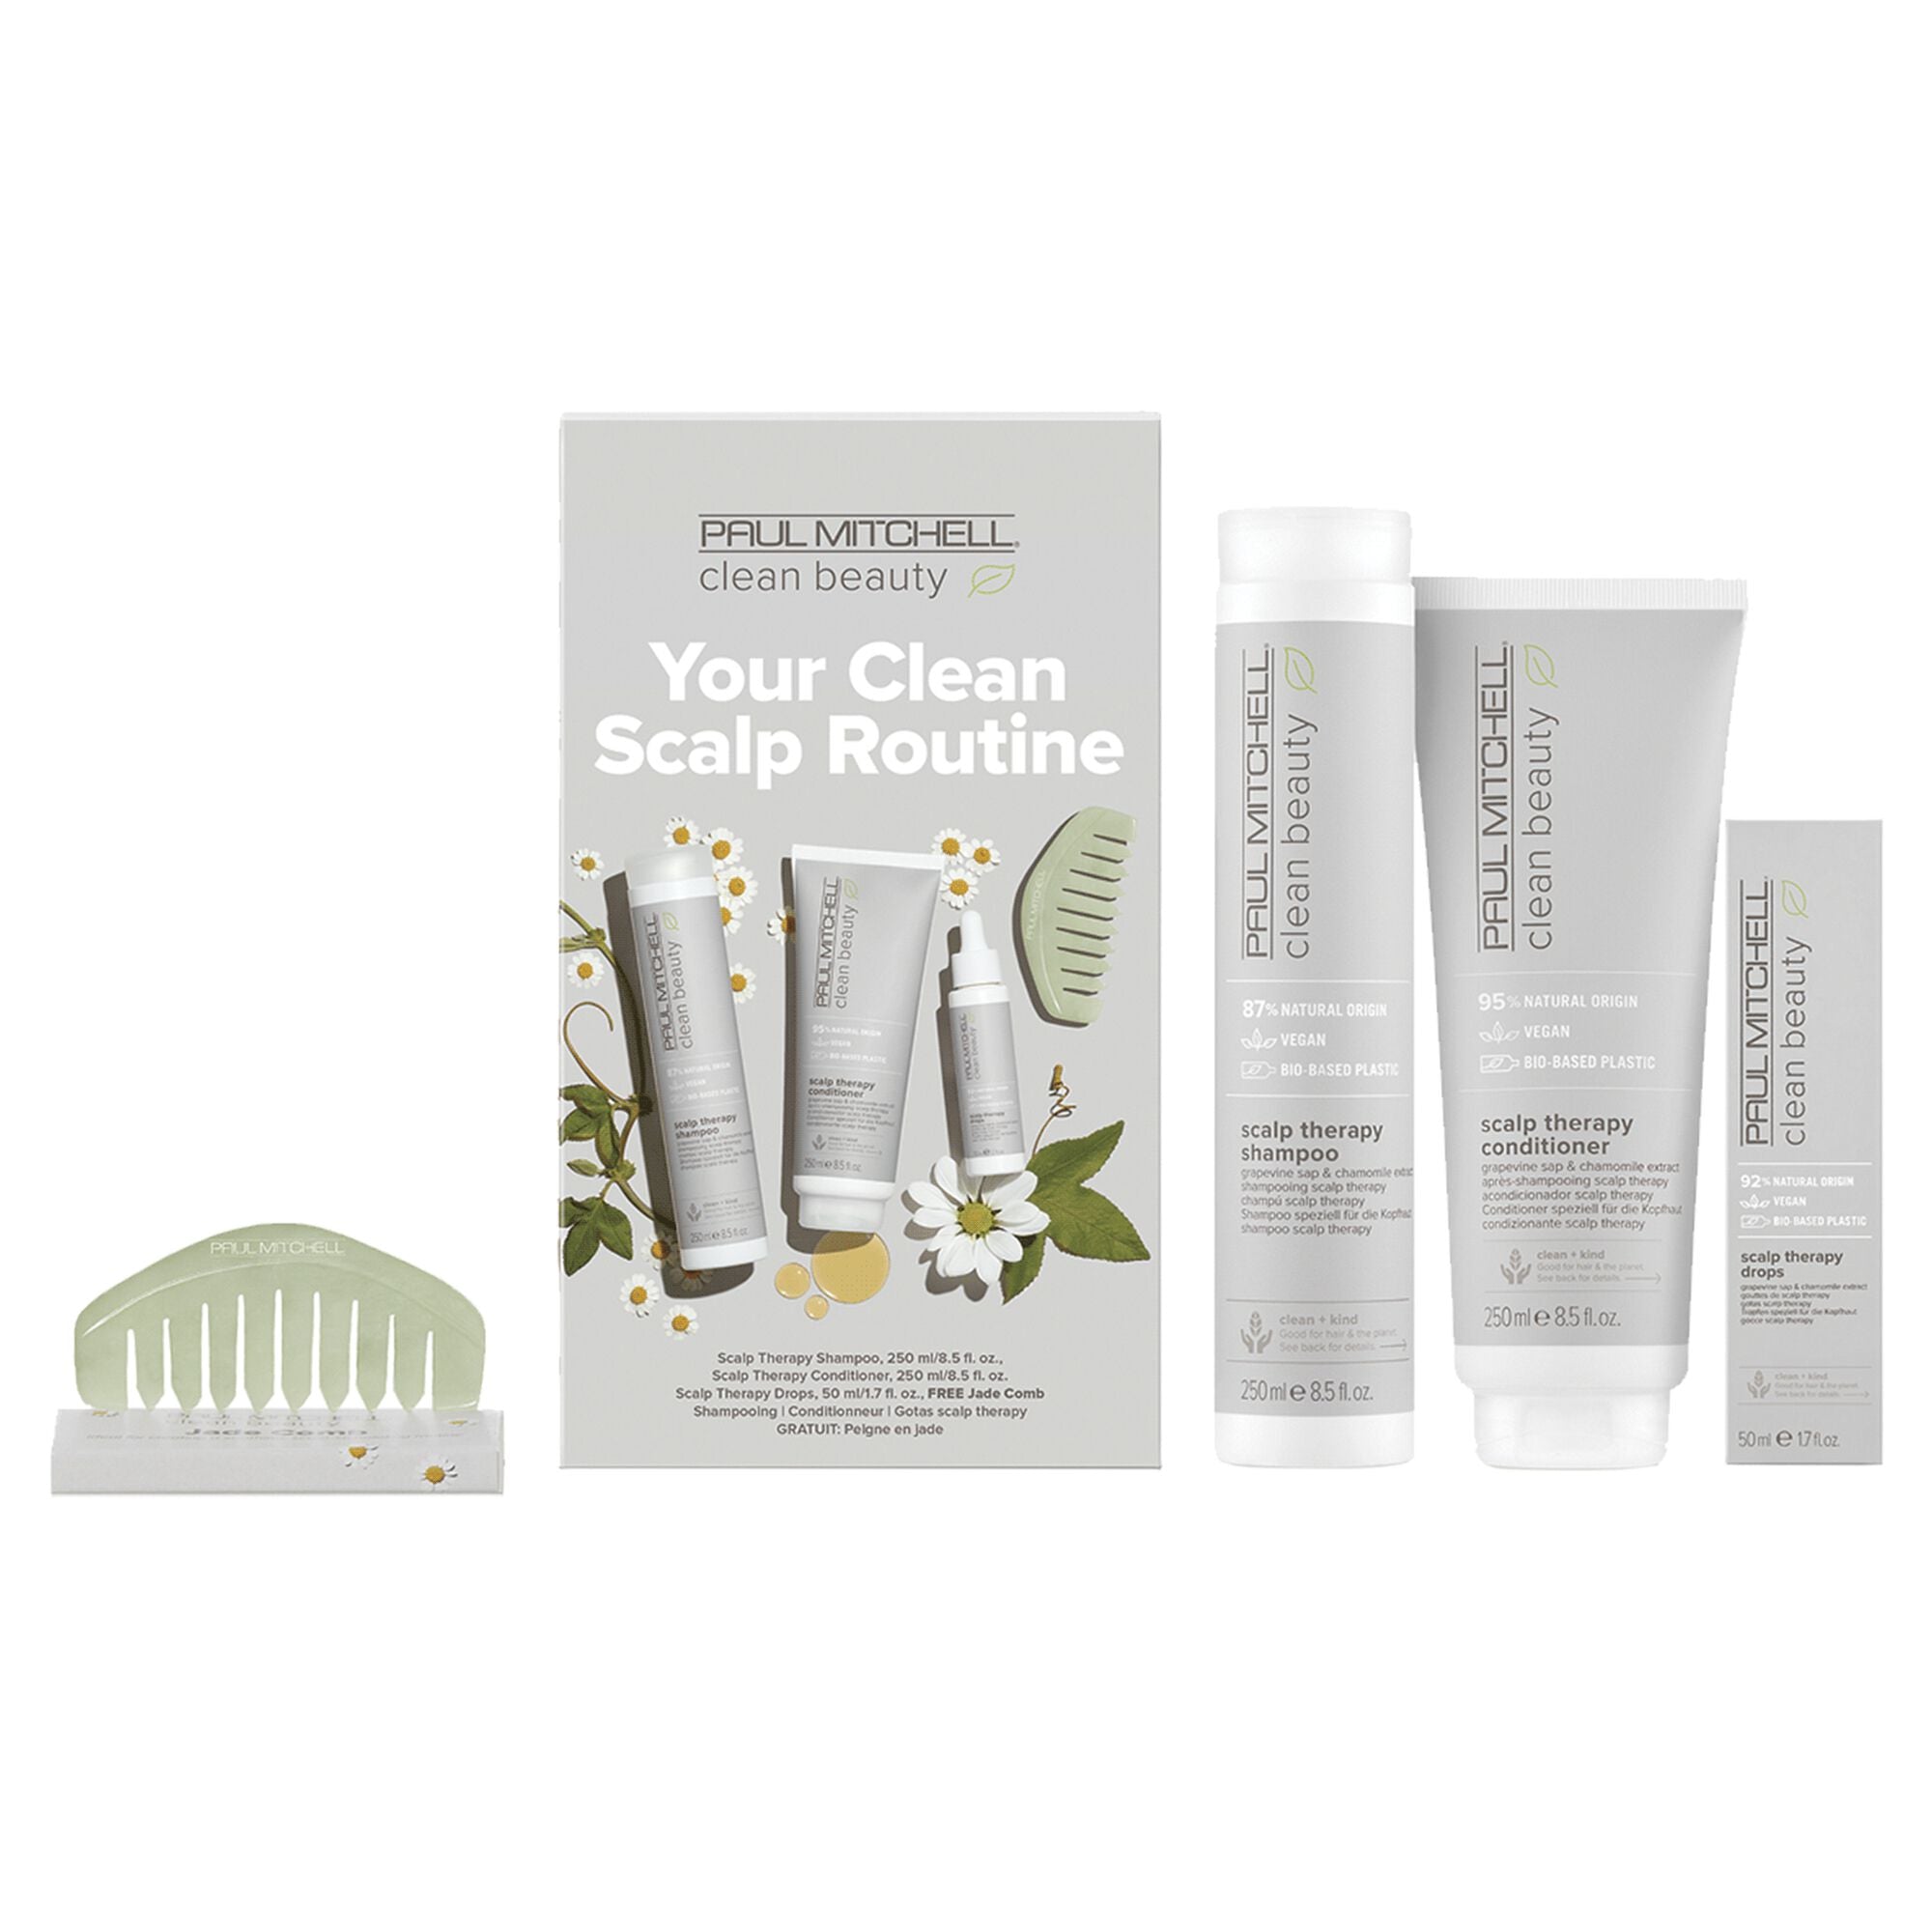 Paul Mitchell Clean Beauty Your Clean Scalp Routine Kit / KIT